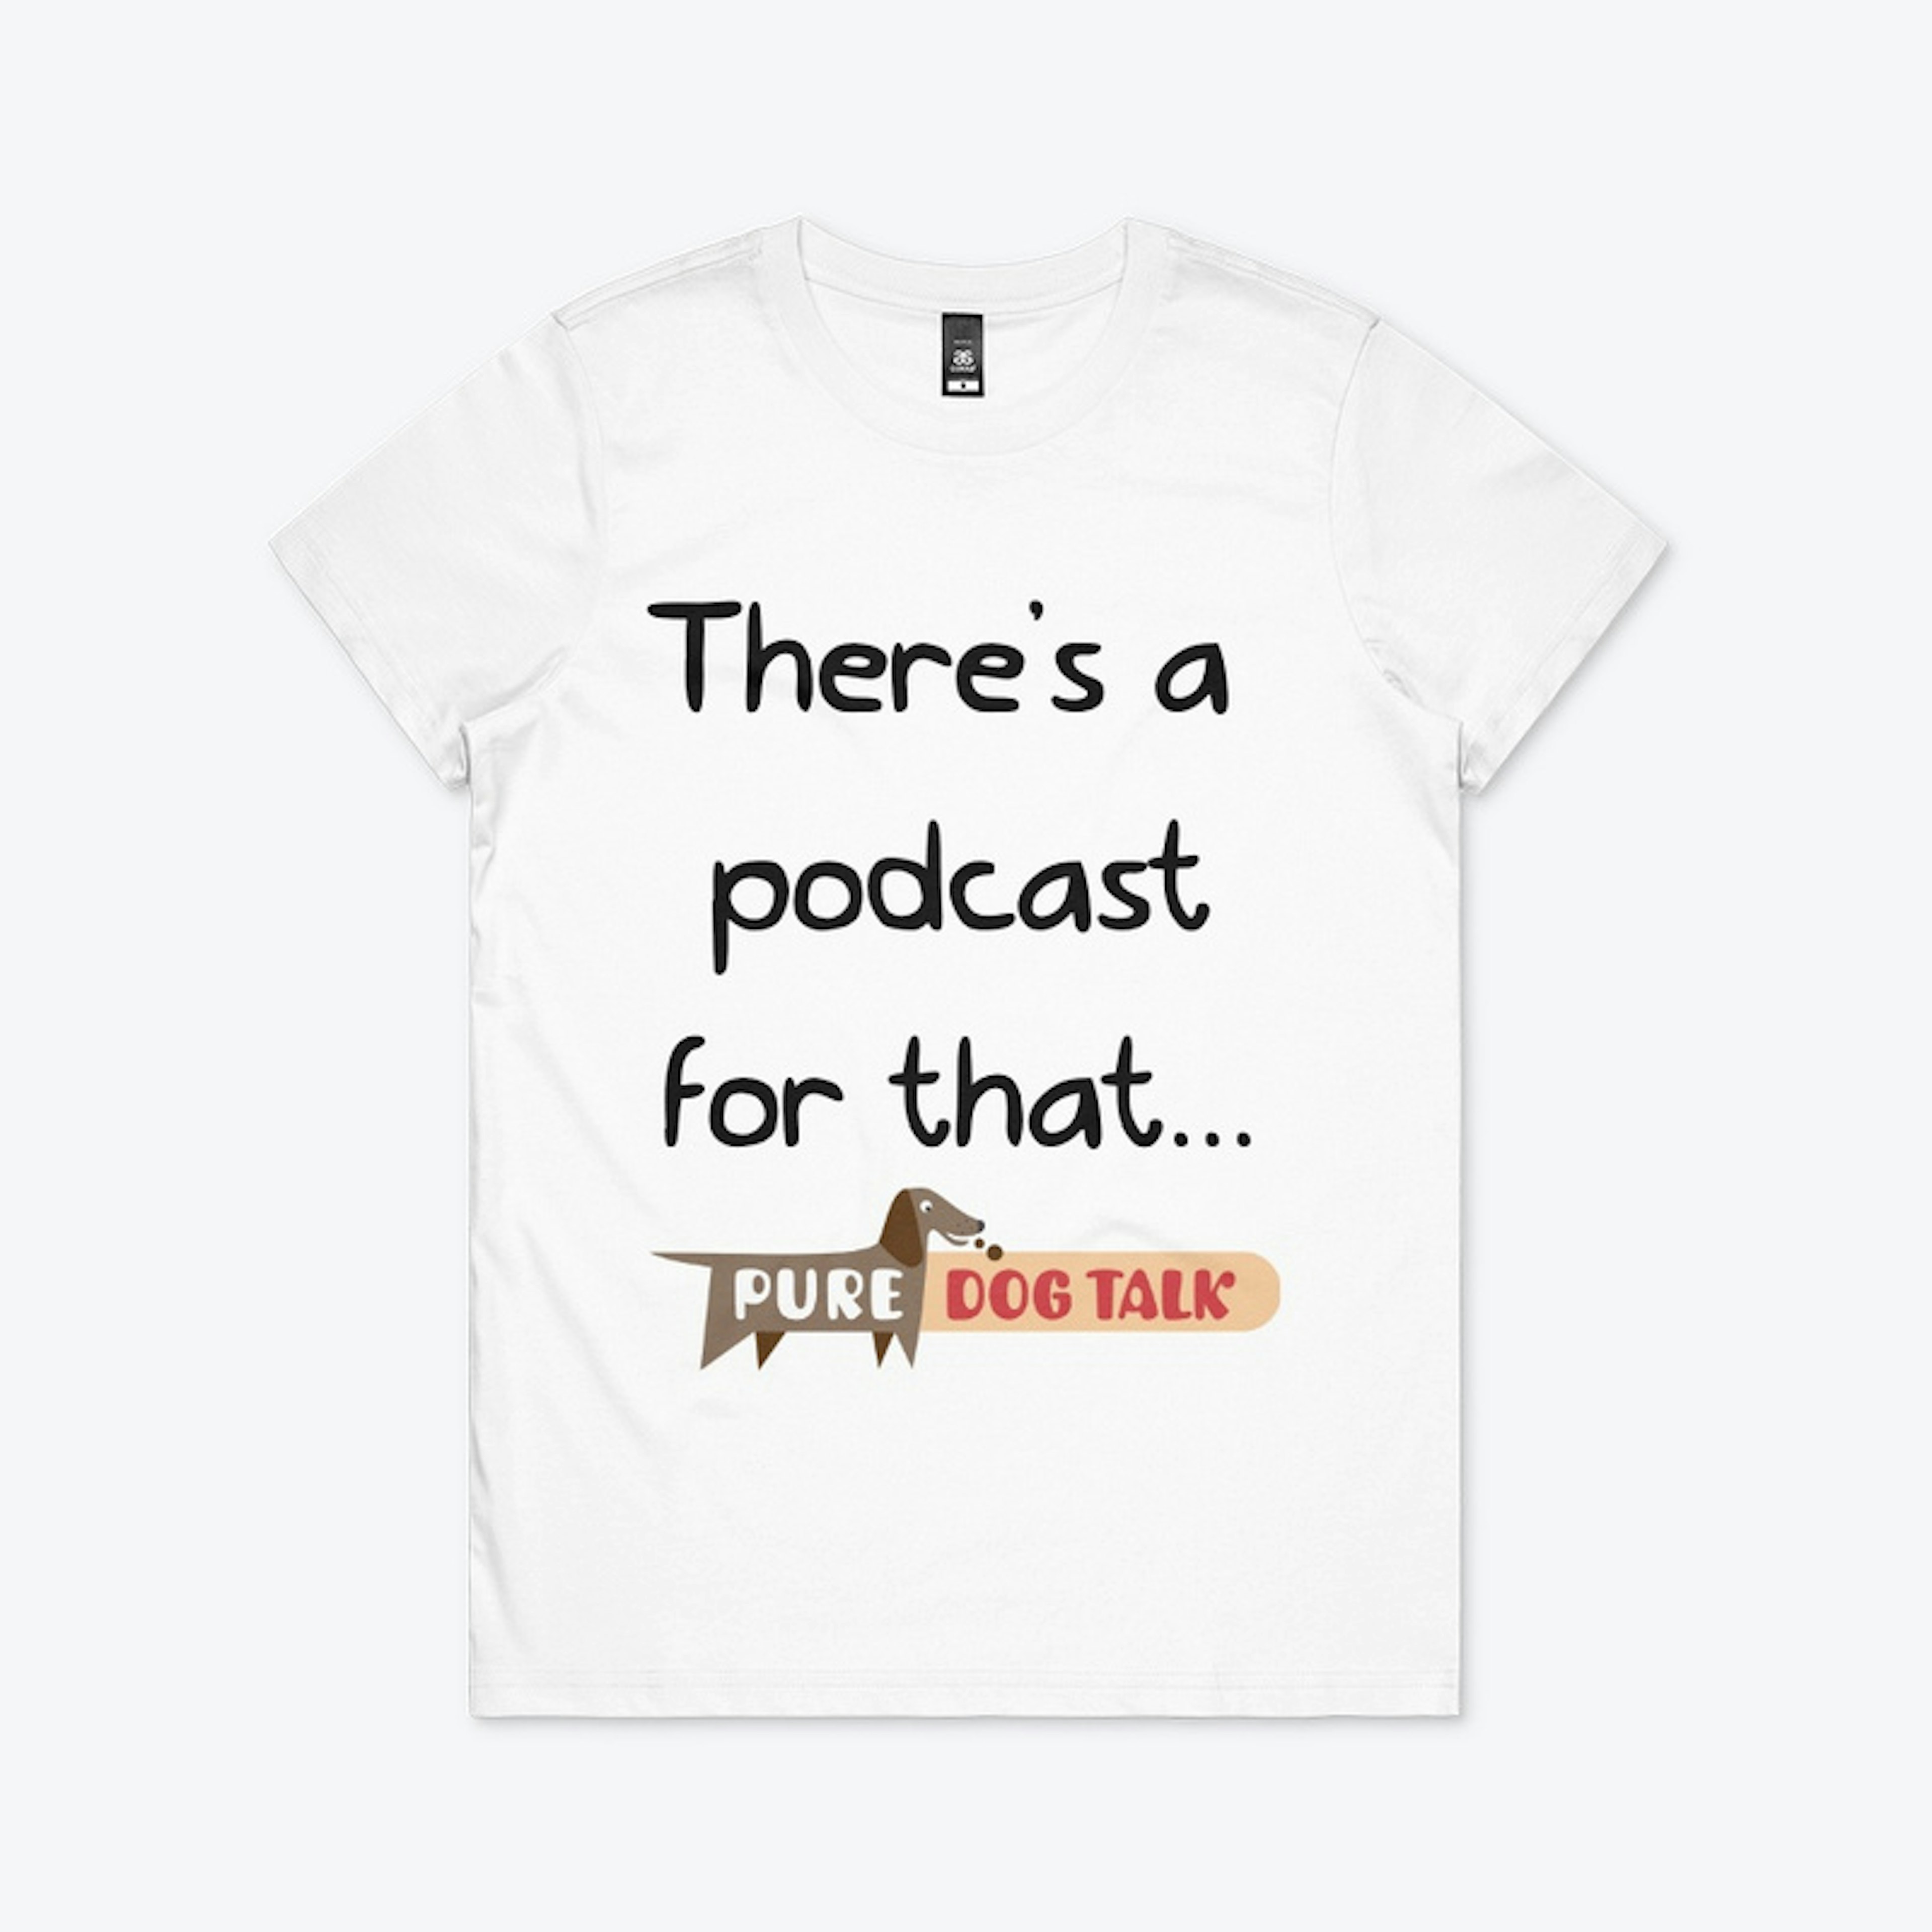 There's a podcast for that...